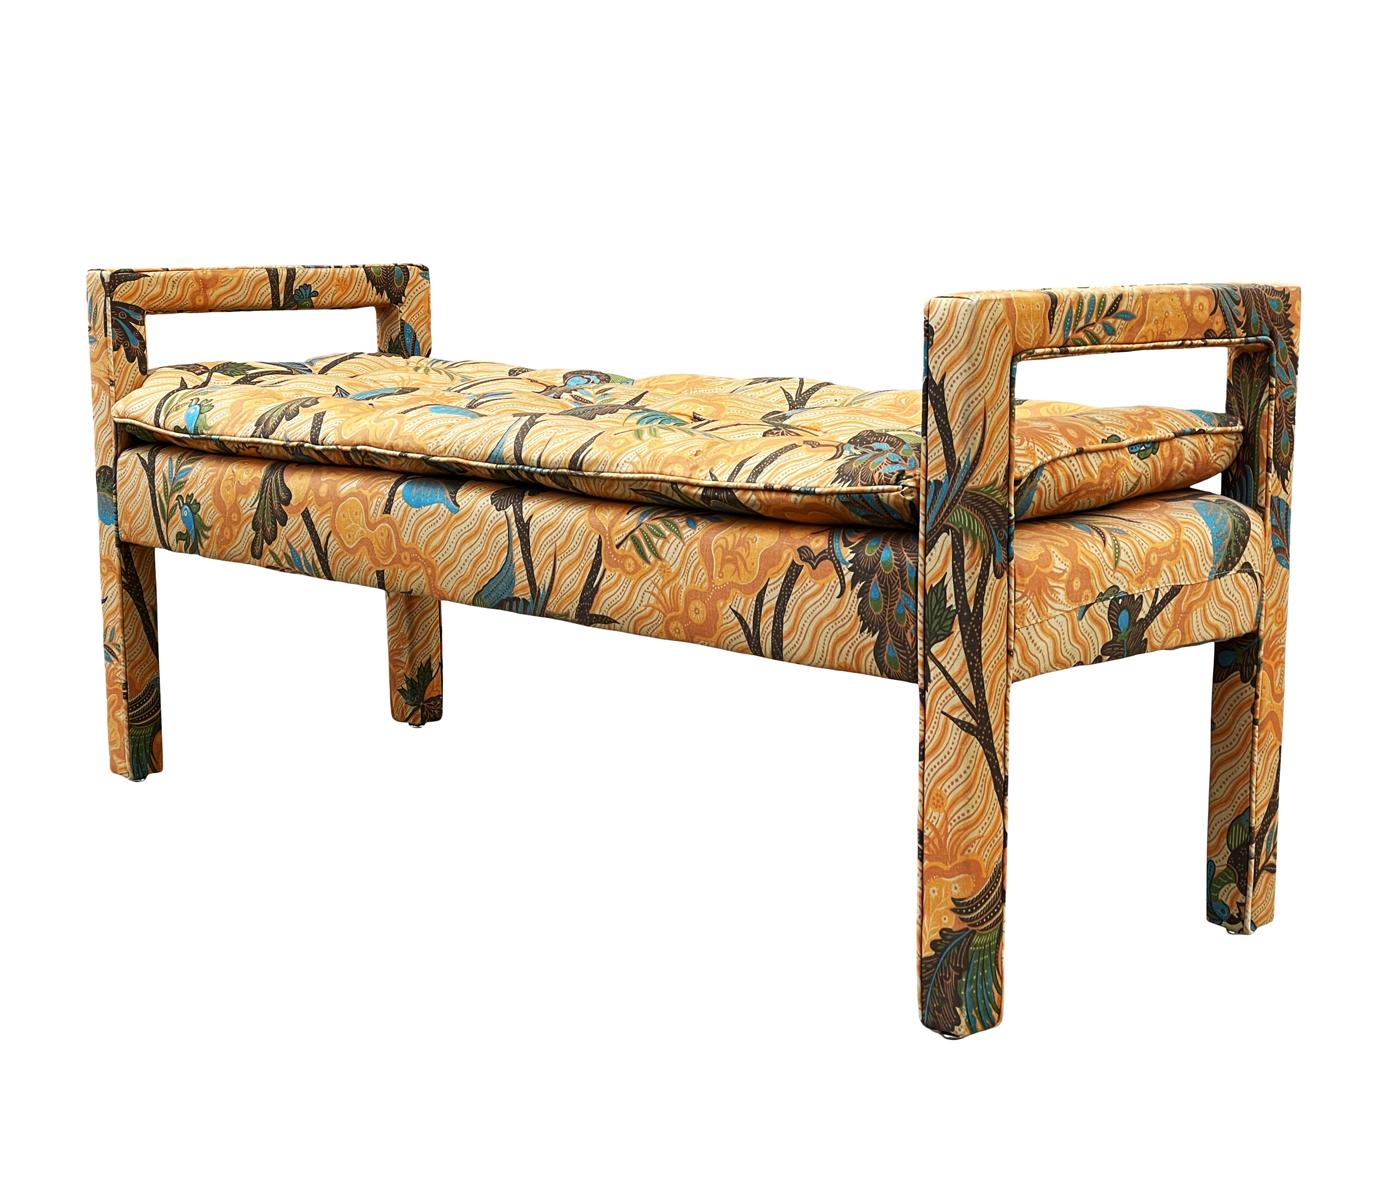 A vintage classic with transitional design lines circa 1970's. This bench features quality vintage construction and still retains it's original fabric. Remarkably clean and ready for use, but could be easily updated with new fabric.